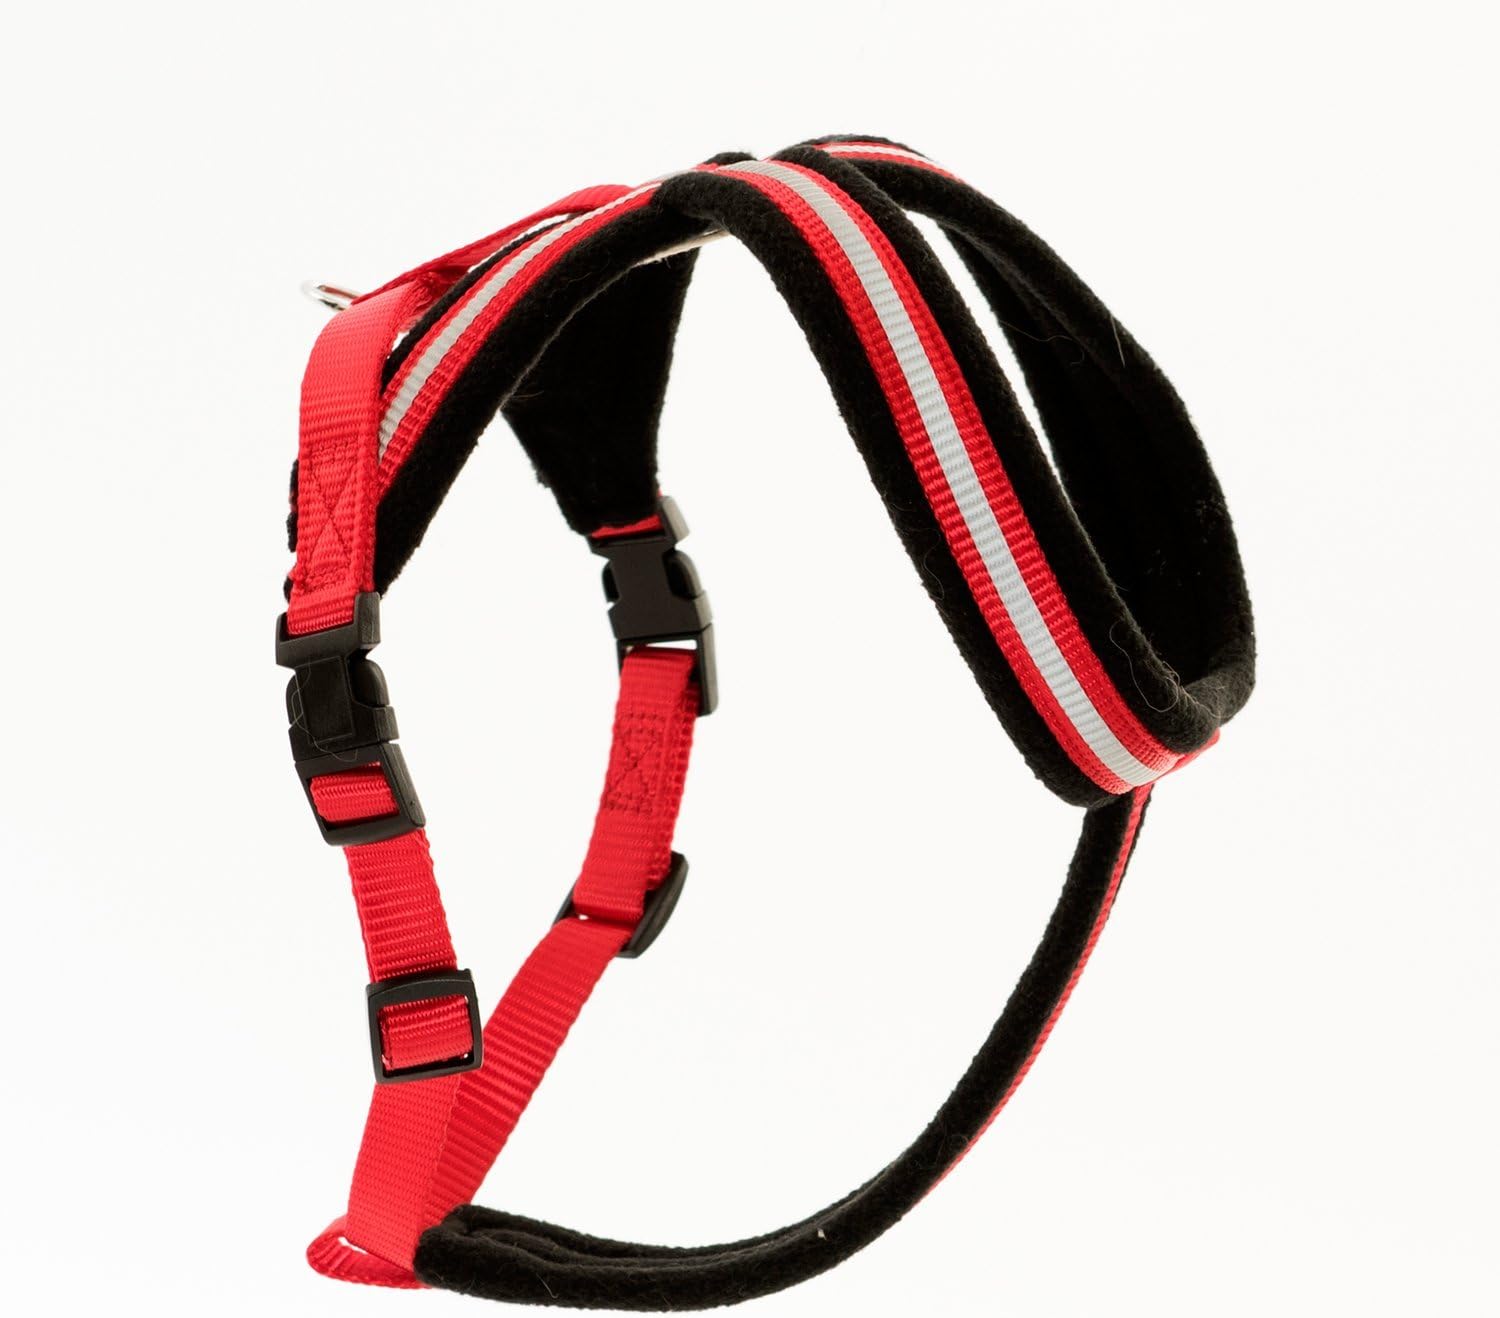 COA Comfy LFR6 Harness Red Large Size